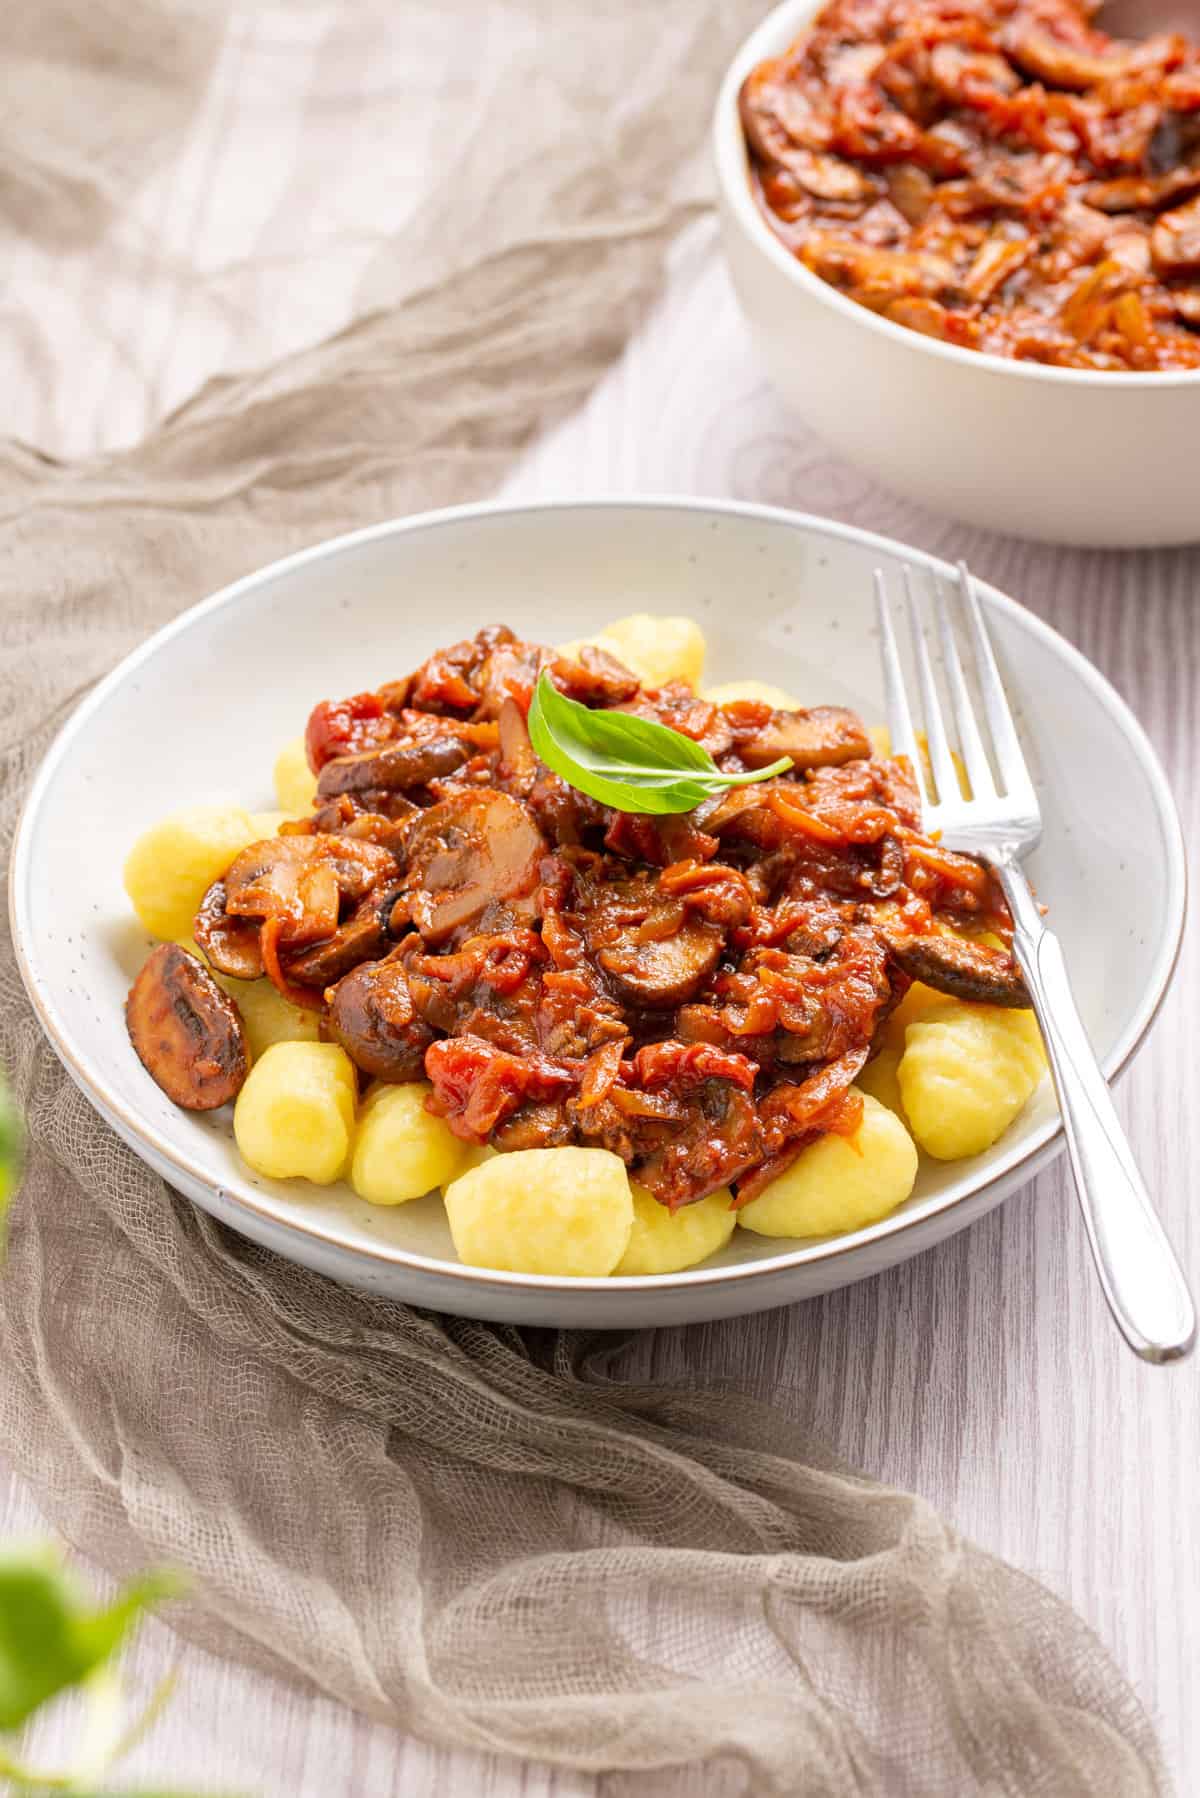 An image of mushroom ragu on top of gnocchi with a fork on the side.